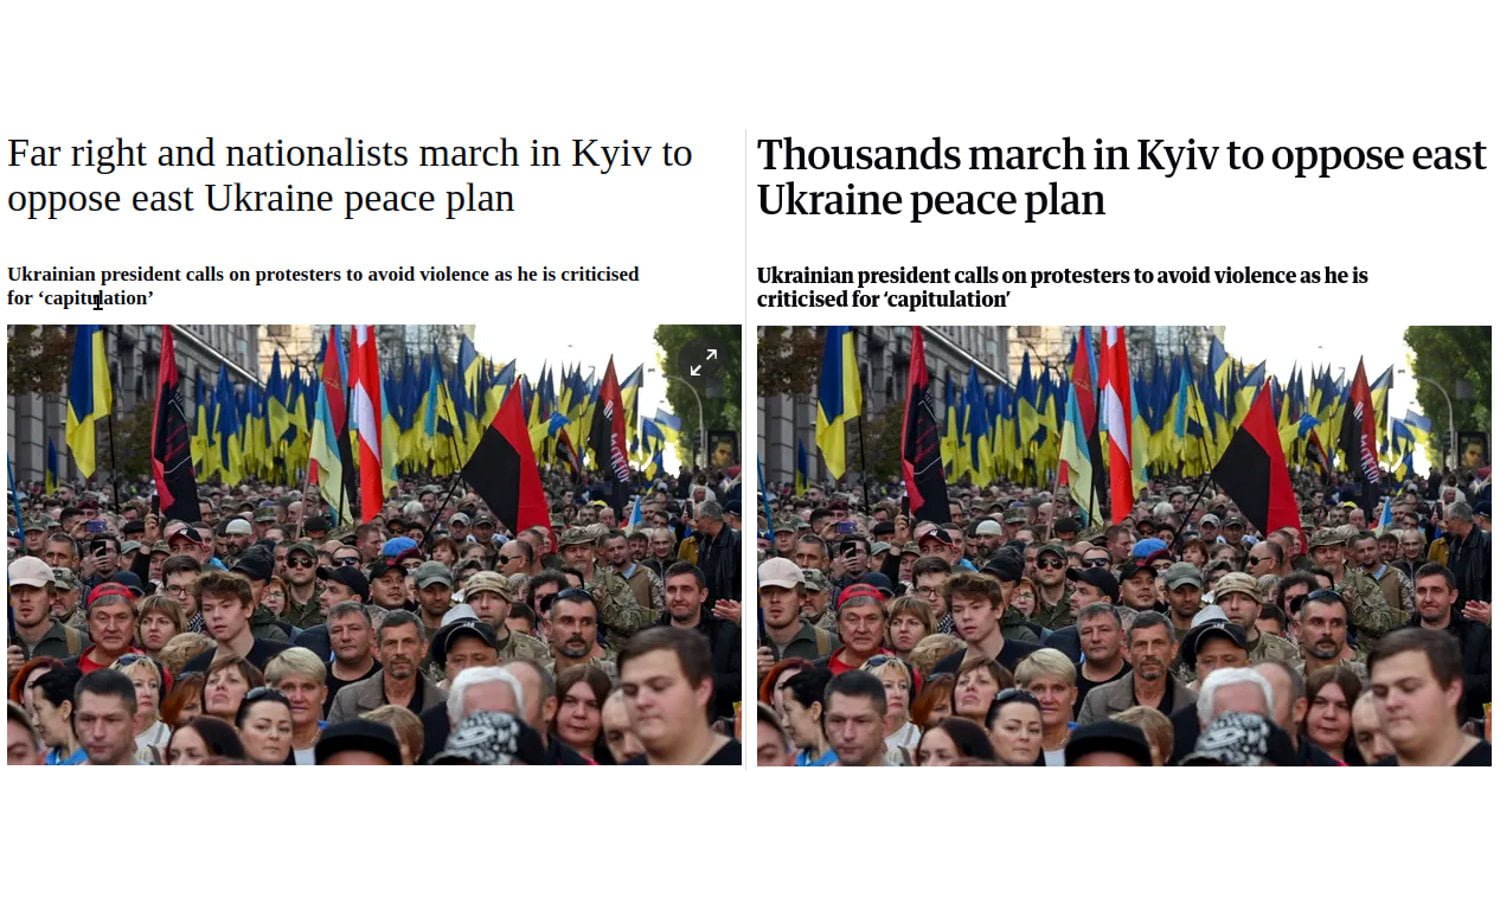 Thousands march in Kyiv, Guardian reports whatever, AP spreads Russian propaganda 2